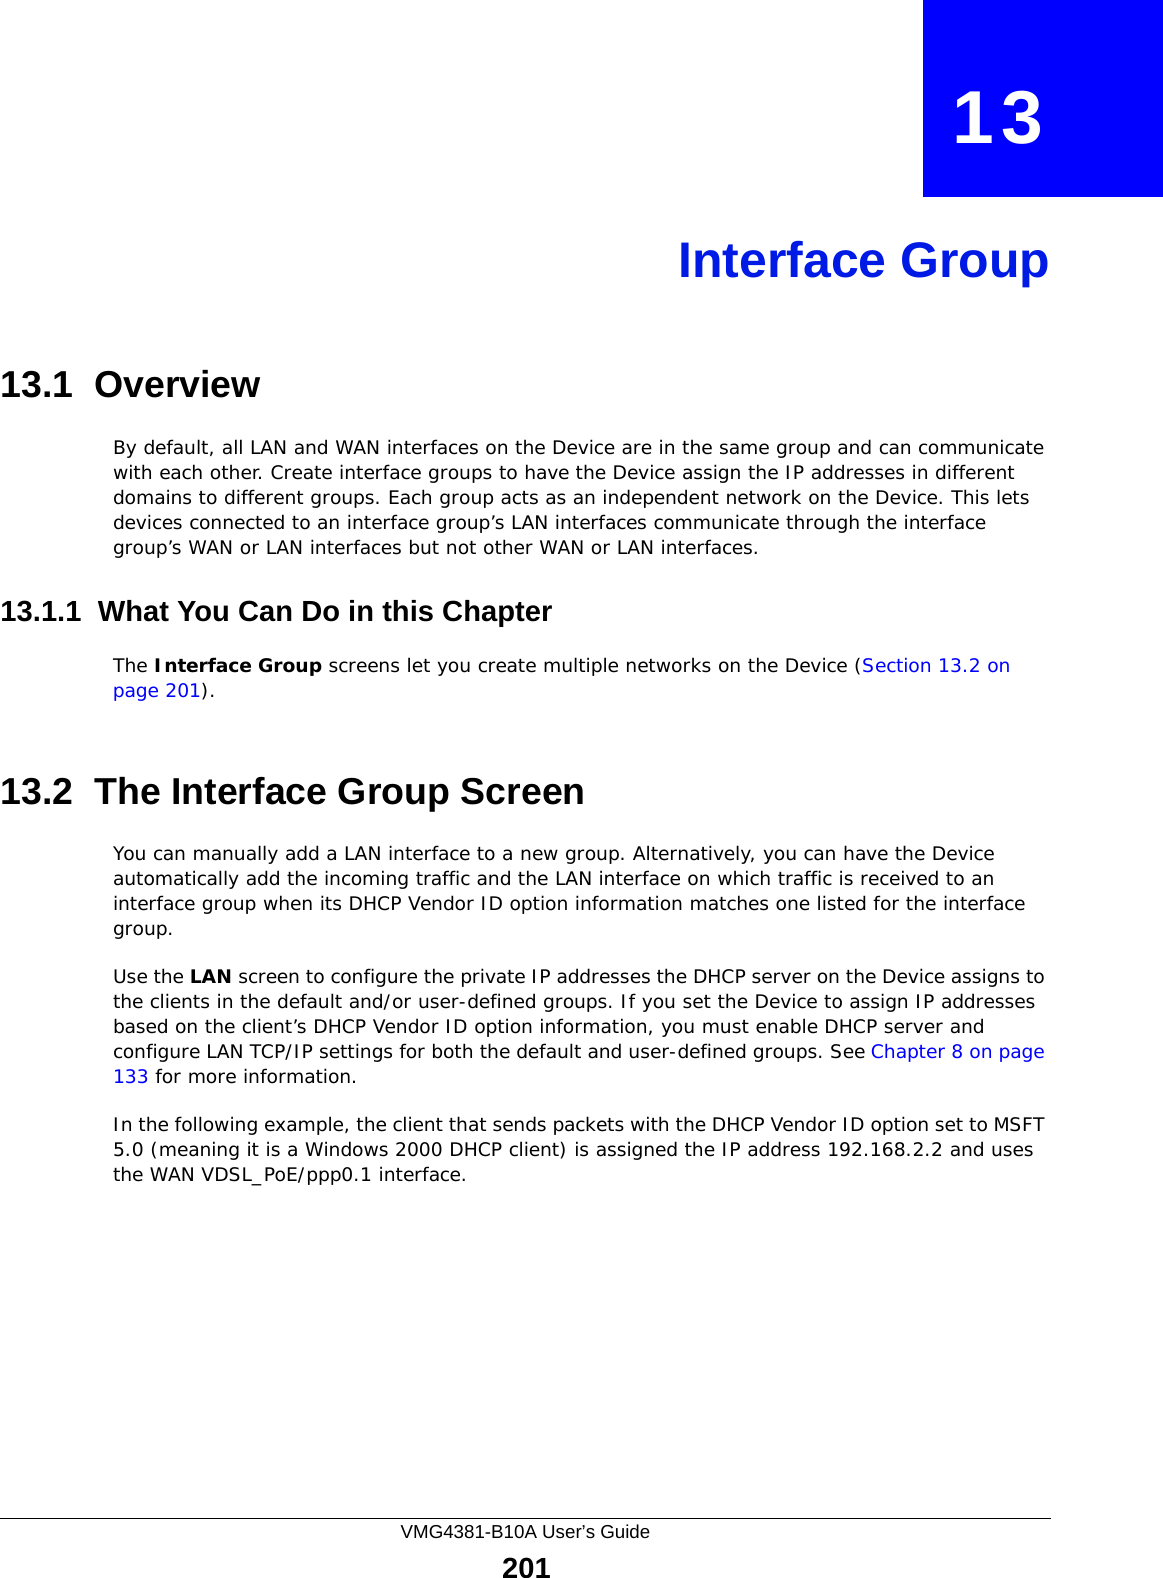 VMG4381-B10A User’s Guide201CHAPTER   13Interface Group13.1  OverviewBy default, all LAN and WAN interfaces on the Device are in the same group and can communicate with each other. Create interface groups to have the Device assign the IP addresses in different domains to different groups. Each group acts as an independent network on the Device. This lets devices connected to an interface group’s LAN interfaces communicate through the interface group’s WAN or LAN interfaces but not other WAN or LAN interfaces.13.1.1  What You Can Do in this ChapterThe Interface Group screens let you create multiple networks on the Device (Section 13.2 on page 201).13.2  The Interface Group ScreenYou can manually add a LAN interface to a new group. Alternatively, you can have the Device automatically add the incoming traffic and the LAN interface on which traffic is received to an interface group when its DHCP Vendor ID option information matches one listed for the interface group. Use the LAN screen to configure the private IP addresses the DHCP server on the Device assigns to the clients in the default and/or user-defined groups. If you set the Device to assign IP addresses based on the client’s DHCP Vendor ID option information, you must enable DHCP server and configure LAN TCP/IP settings for both the default and user-defined groups. See Chapter 8 on page 133 for more information.In the following example, the client that sends packets with the DHCP Vendor ID option set to MSFT 5.0 (meaning it is a Windows 2000 DHCP client) is assigned the IP address 192.168.2.2 and uses the WAN VDSL_PoE/ppp0.1 interface.